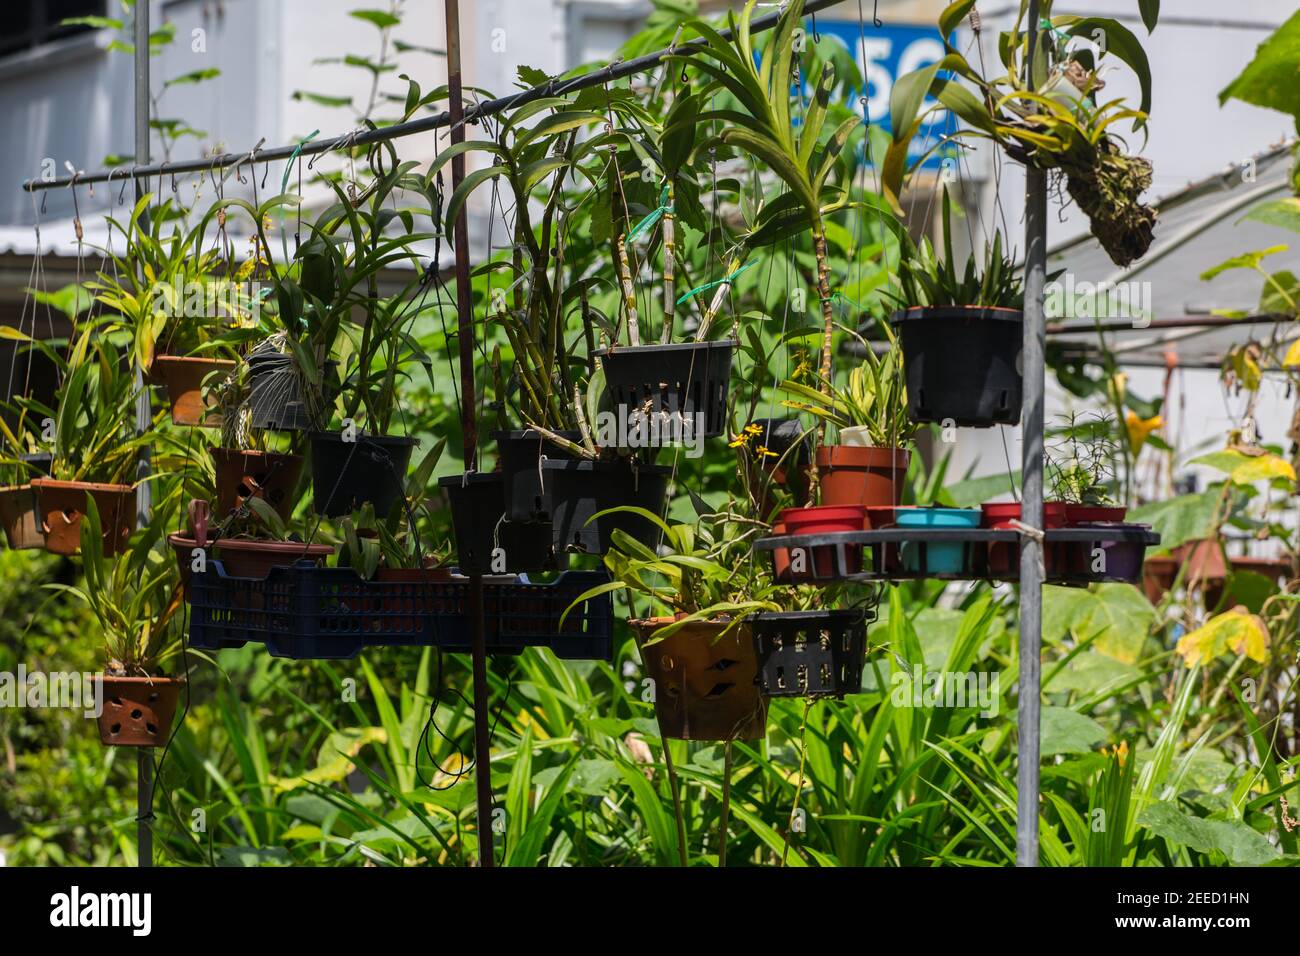 Plants pots hang up to receive more light from the sun. It also can attract insects and birds in helping climate and wildlife population. Stock Photo